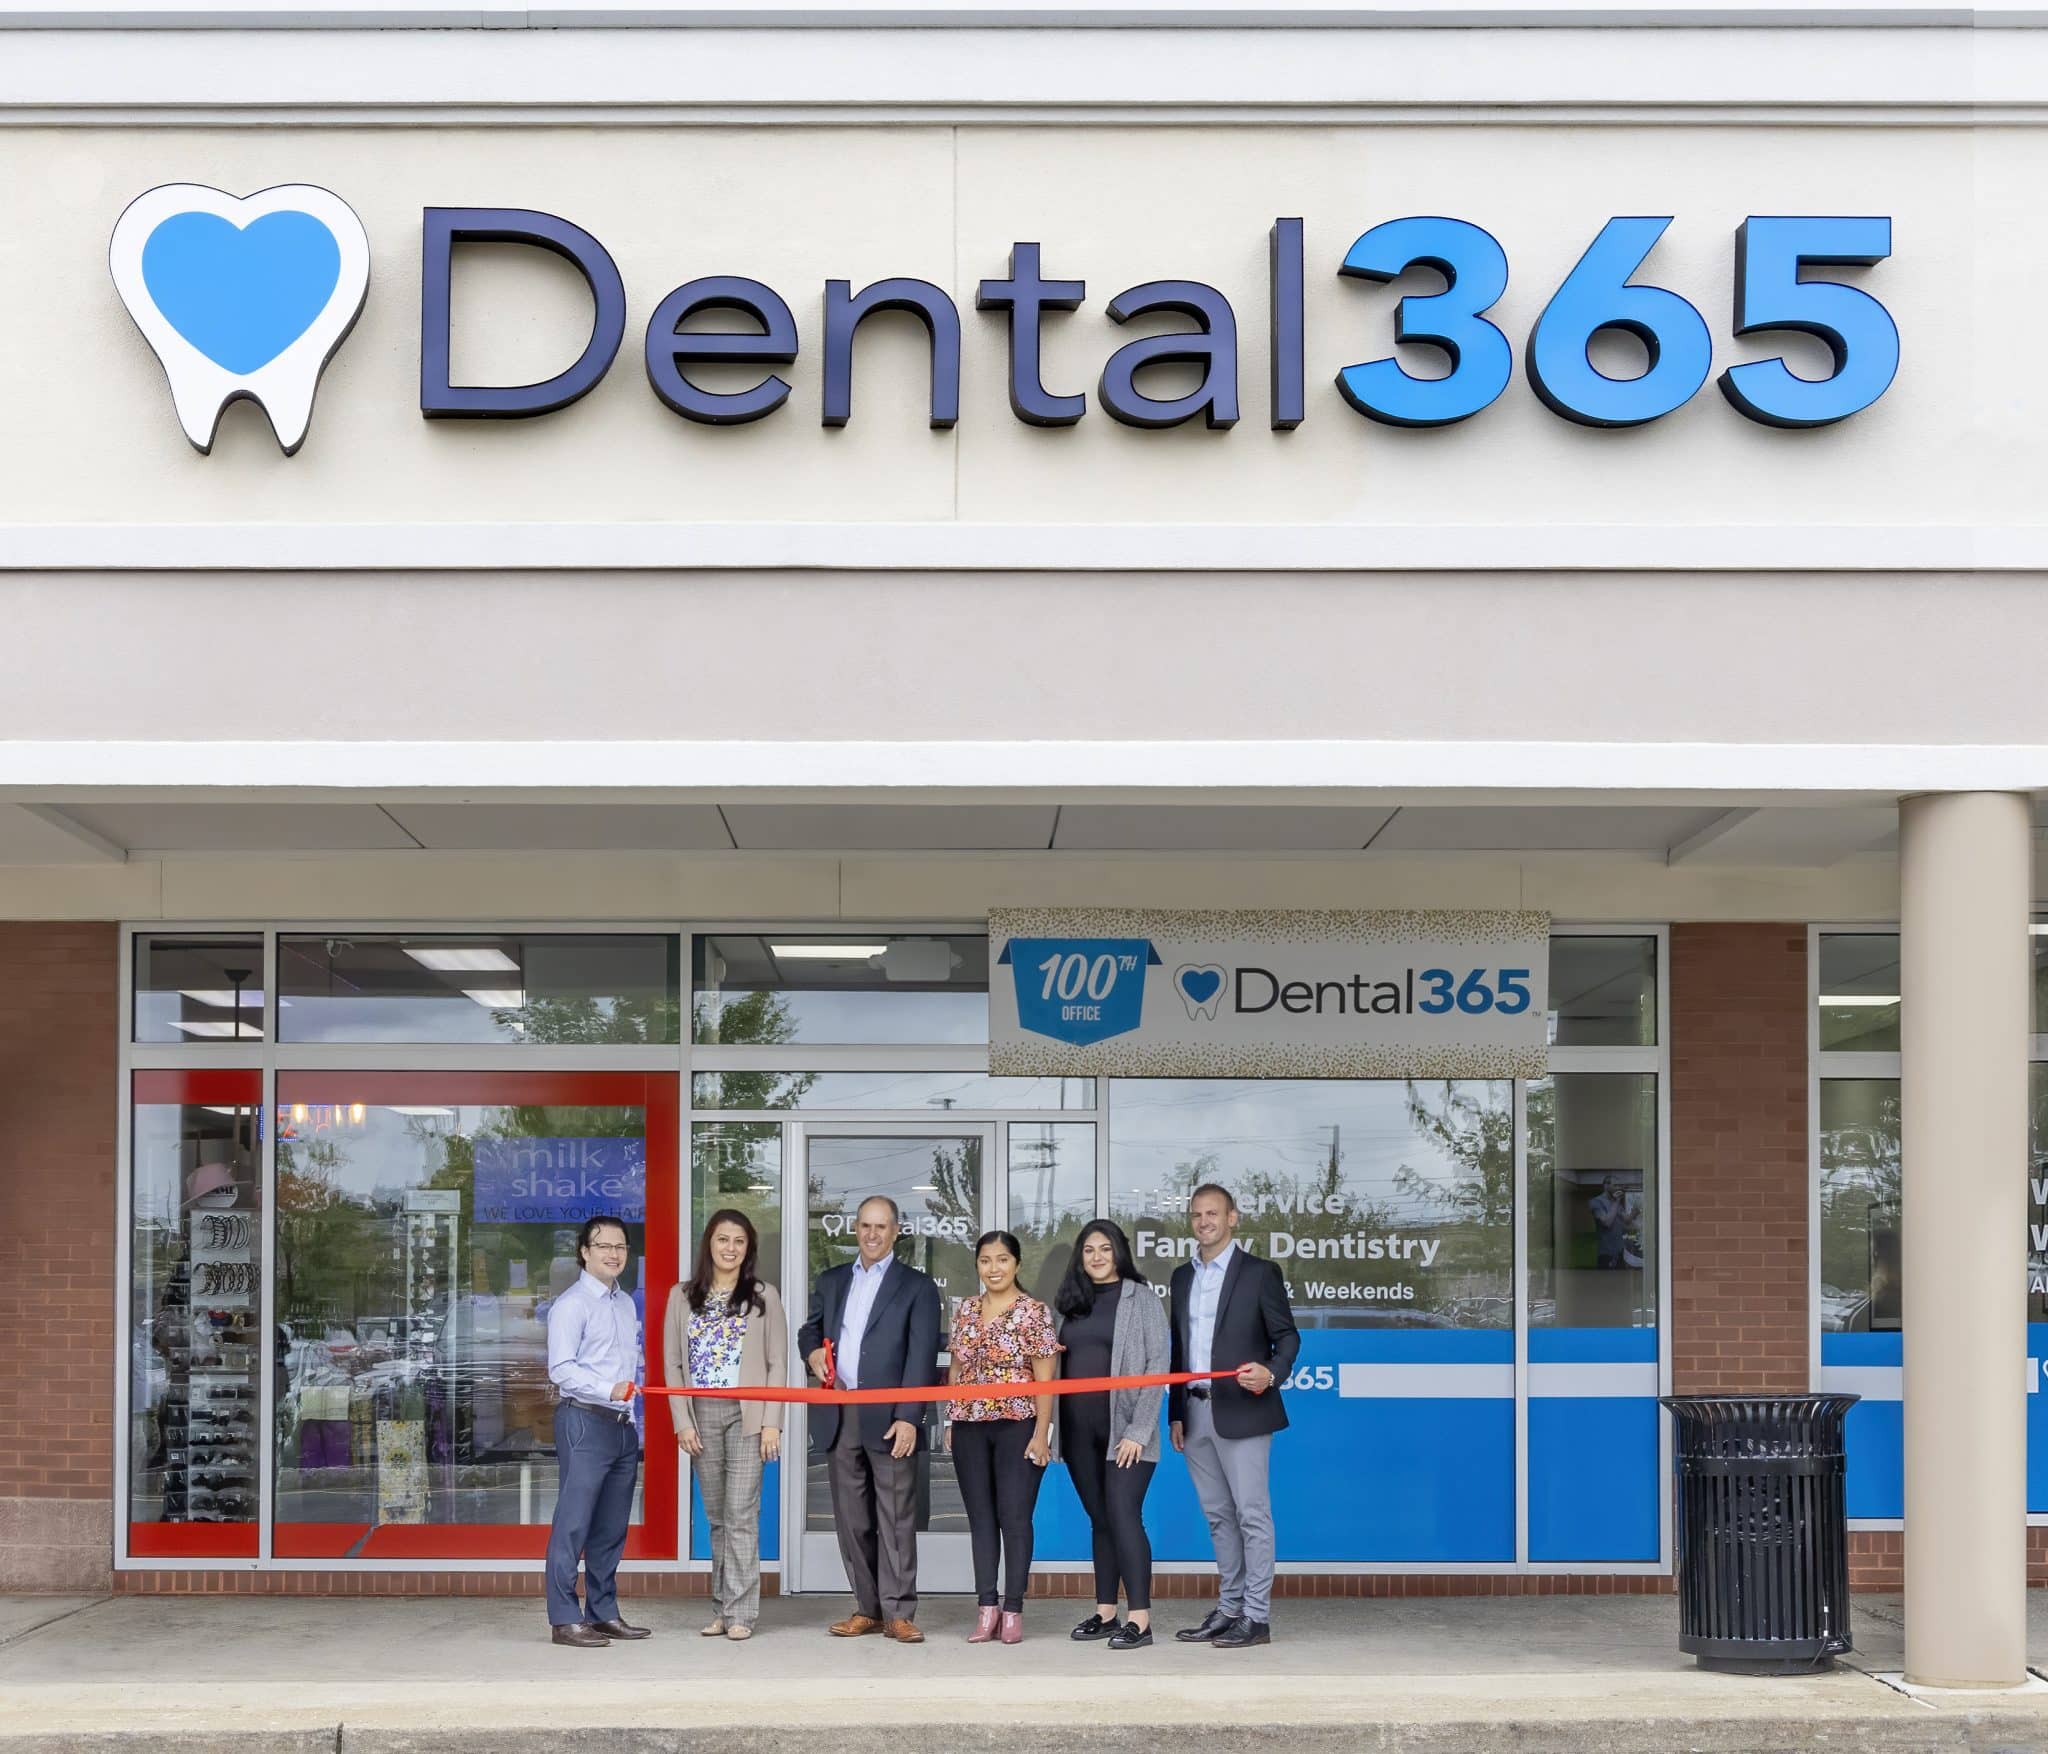 Dental365 Hosts Ribbon Cutting Ceremony for 100th Location in Brick Township, NJ